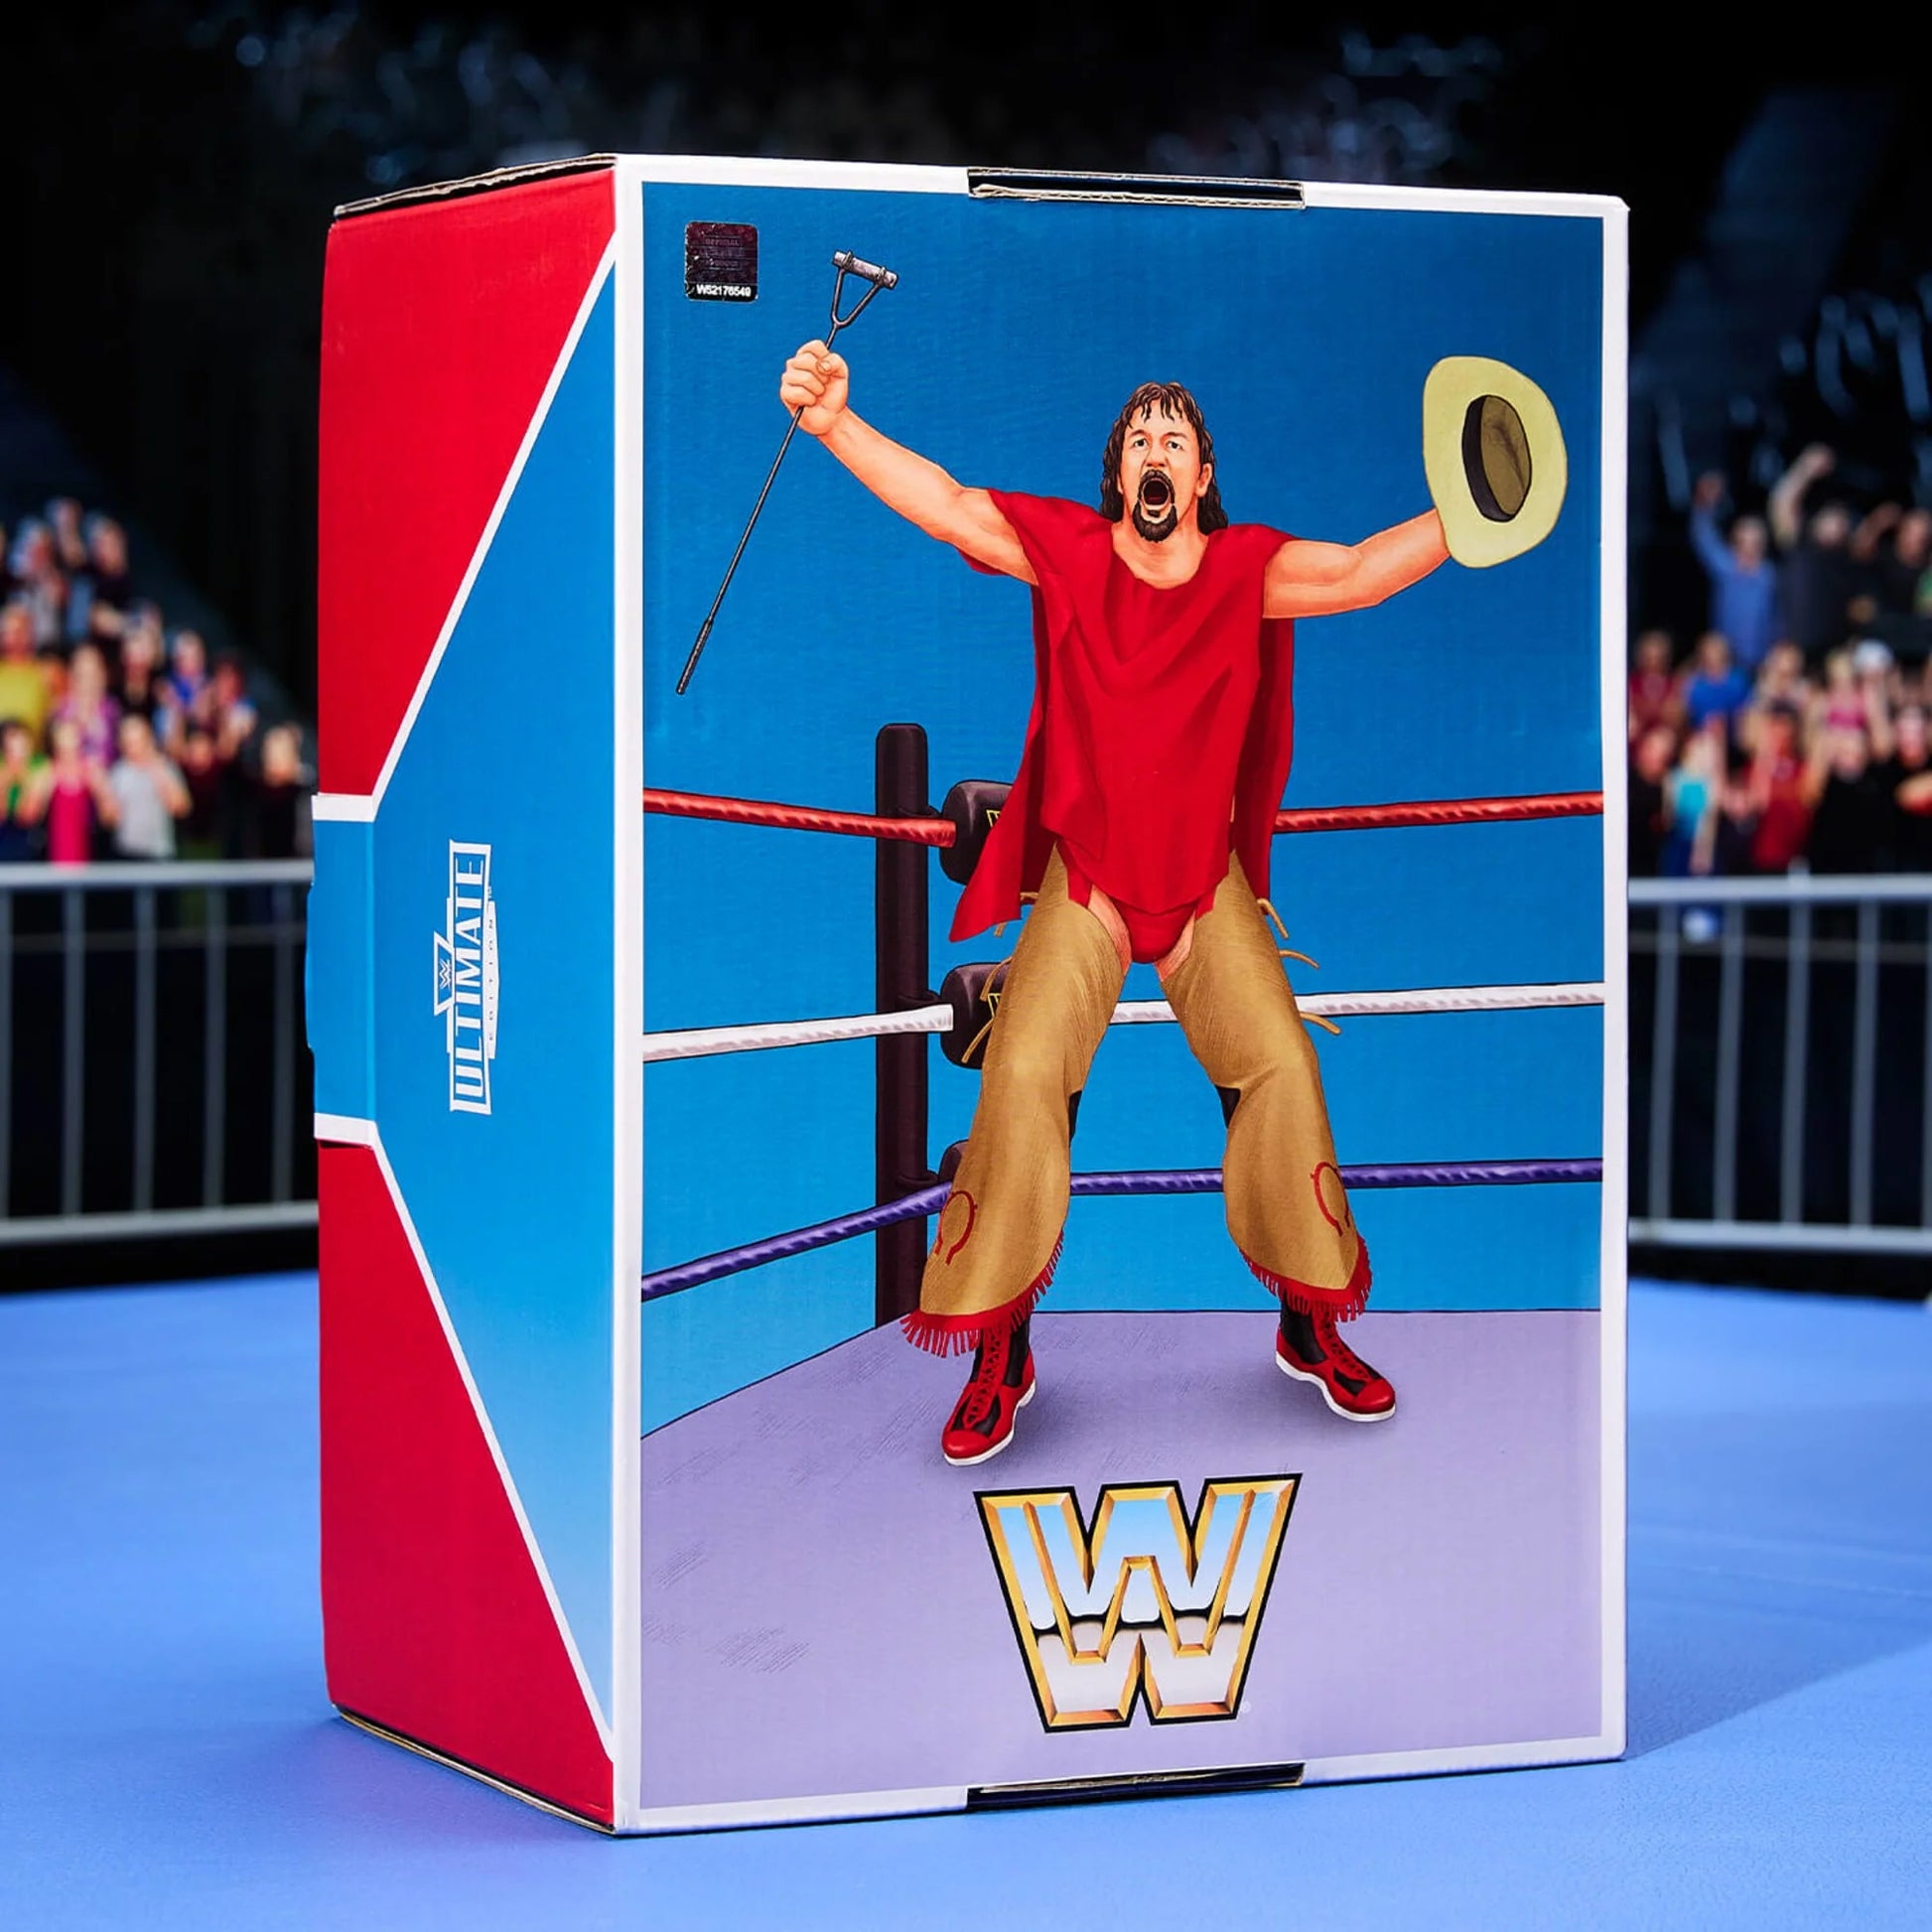 WWE Coliseum Collection available at www.slamazon.ca